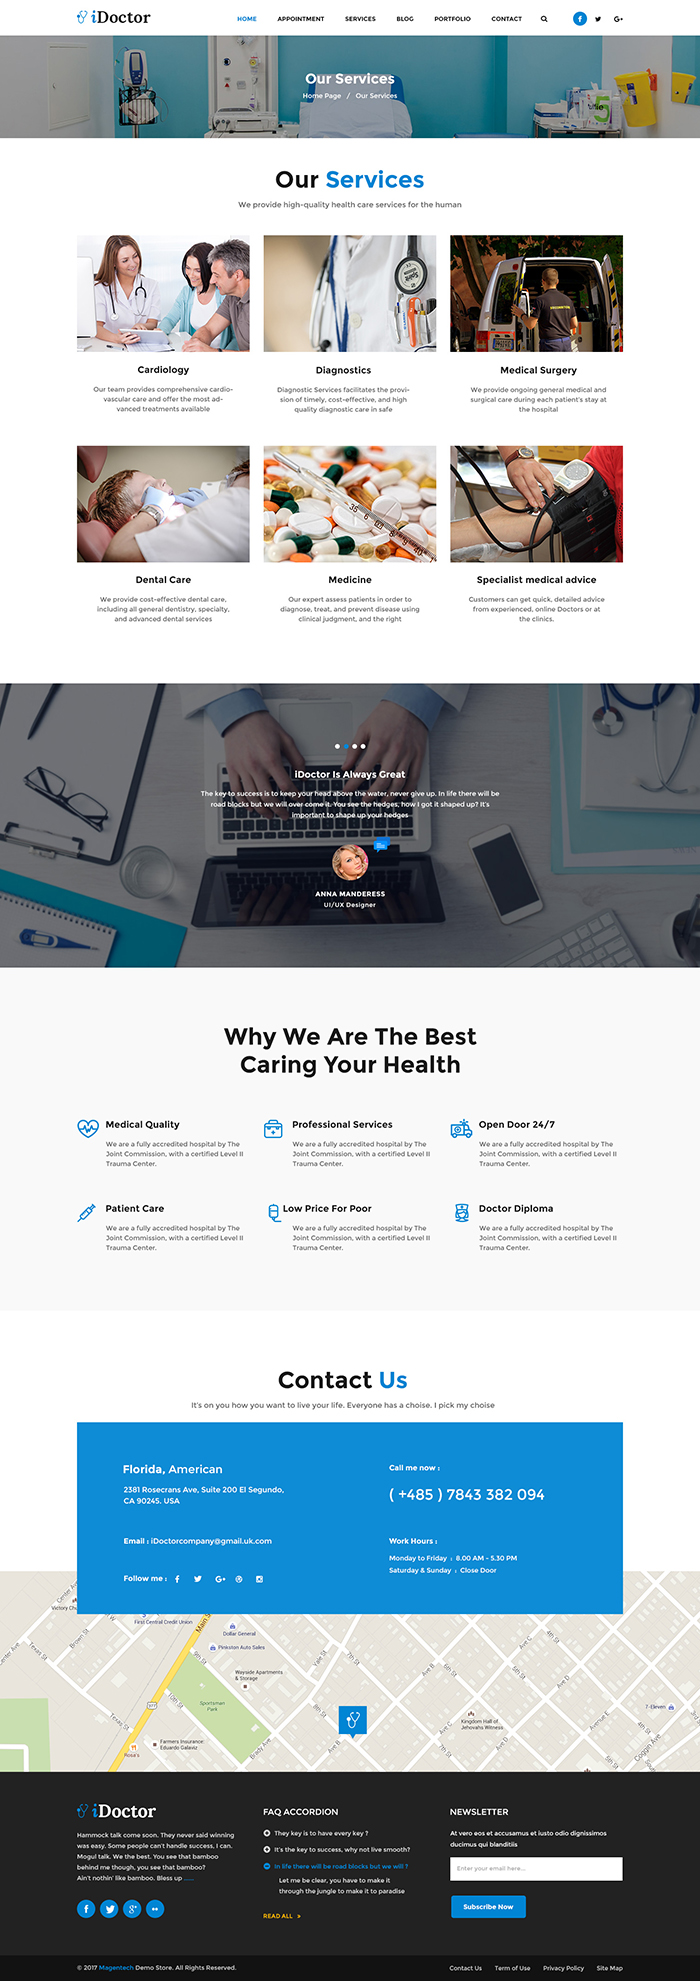 [PREVIEW] SJ iDoctor - Awesome Joomla Template Design for Doctor ...